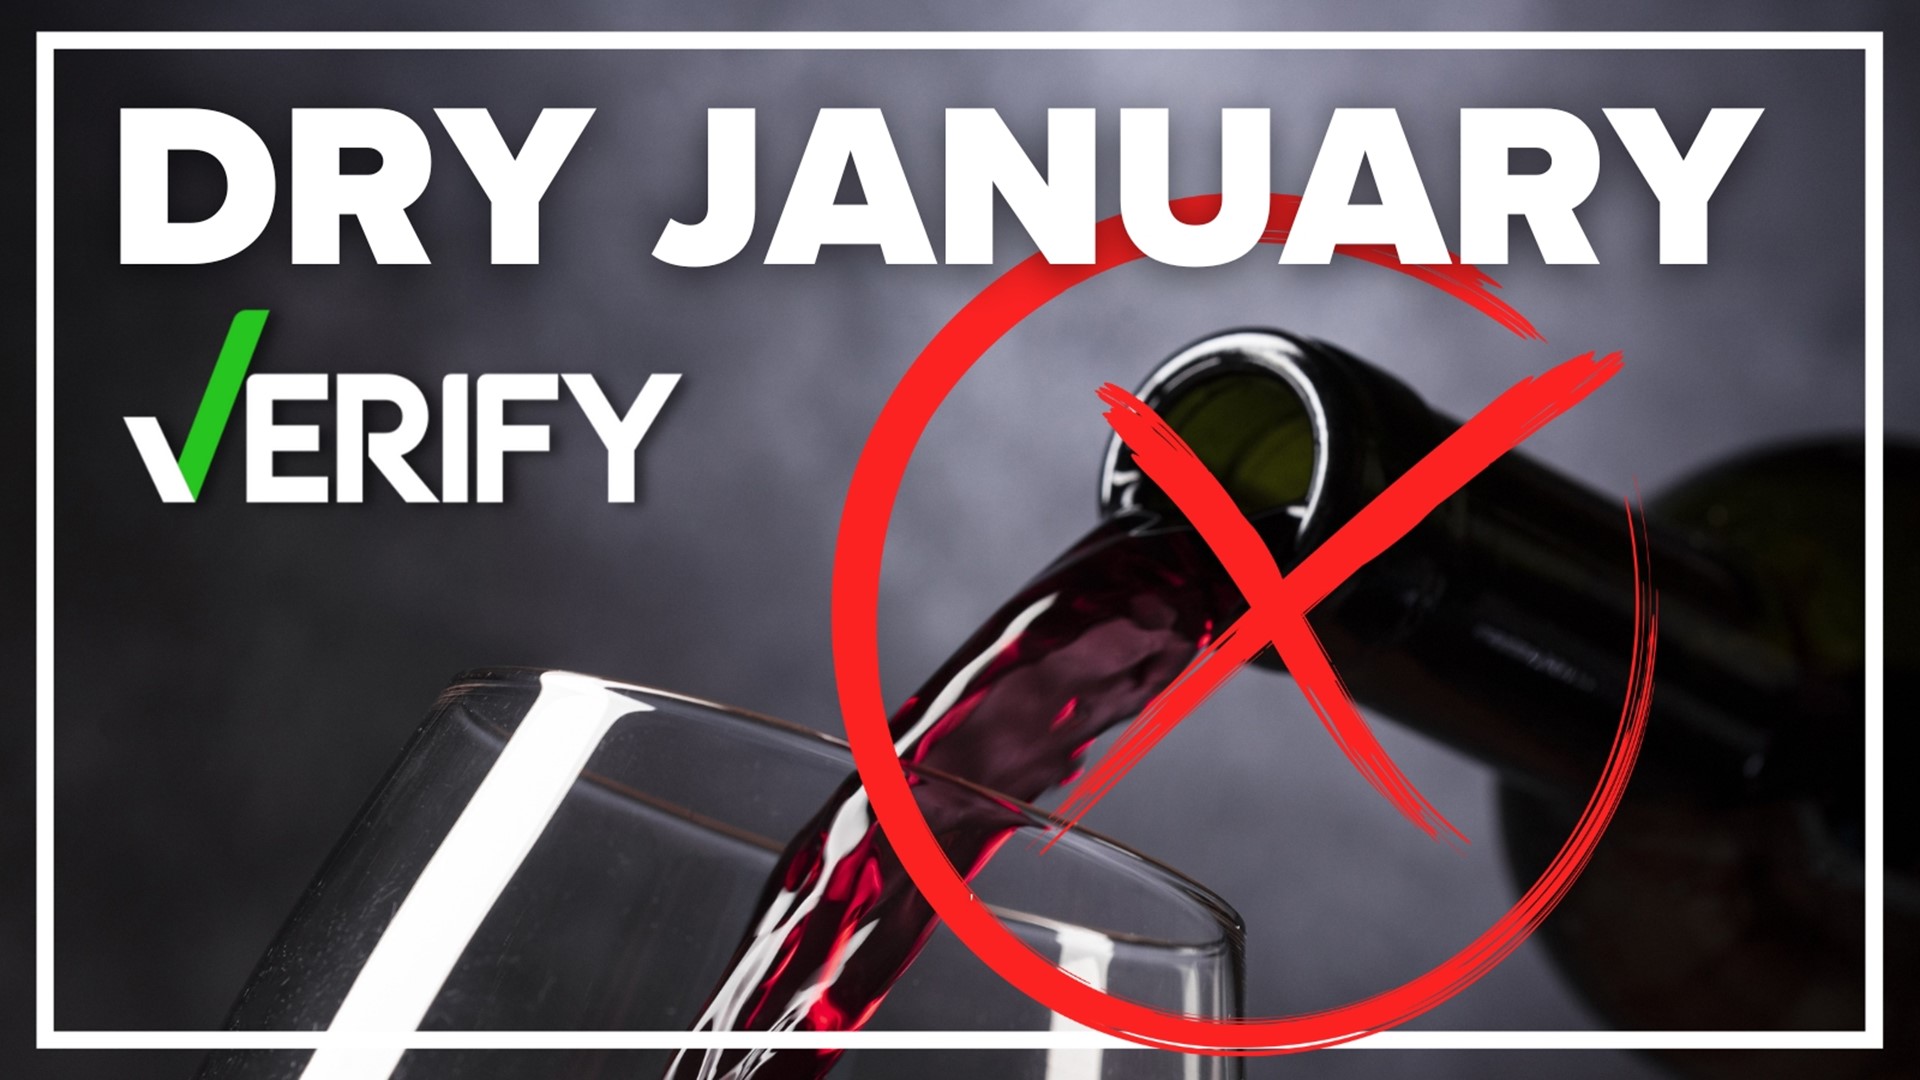 We verify if not drinking alcohol for a month will actually help reduce future consumption.